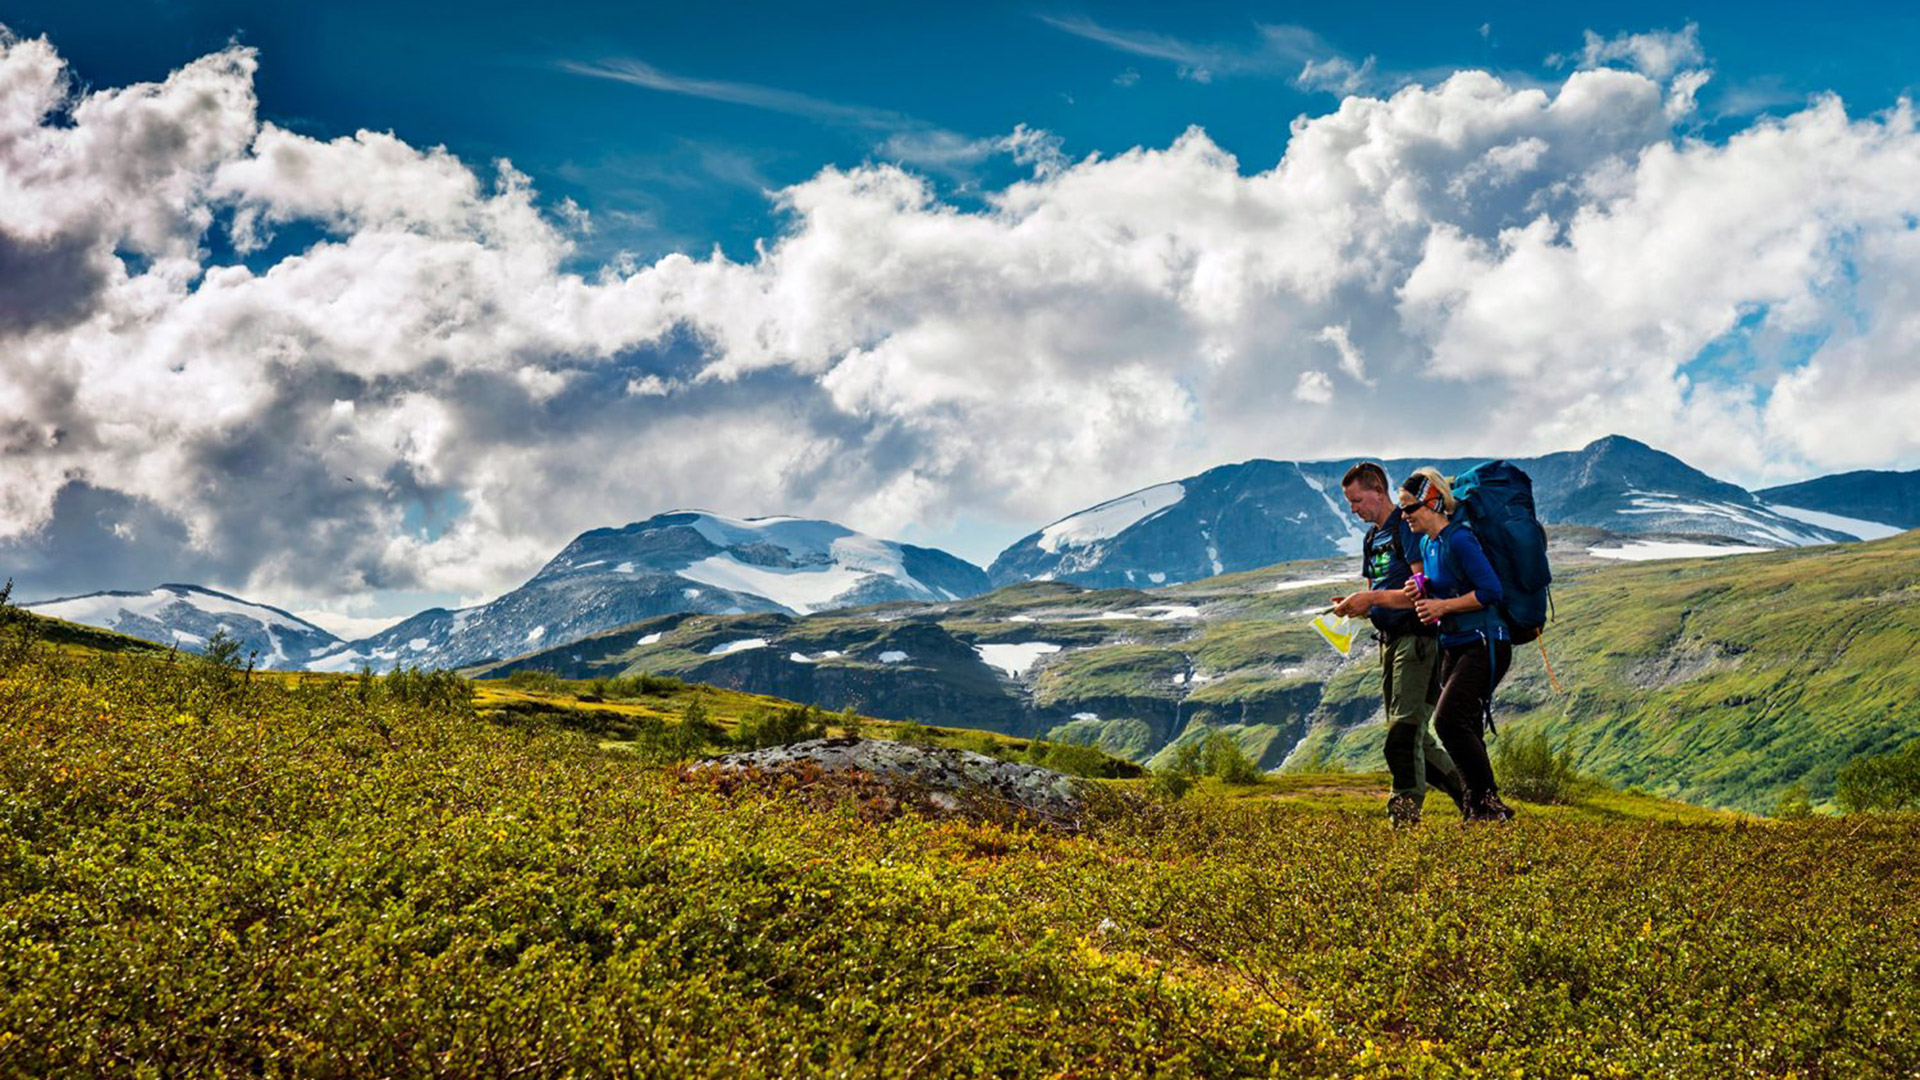 Two people hiking in the mountains